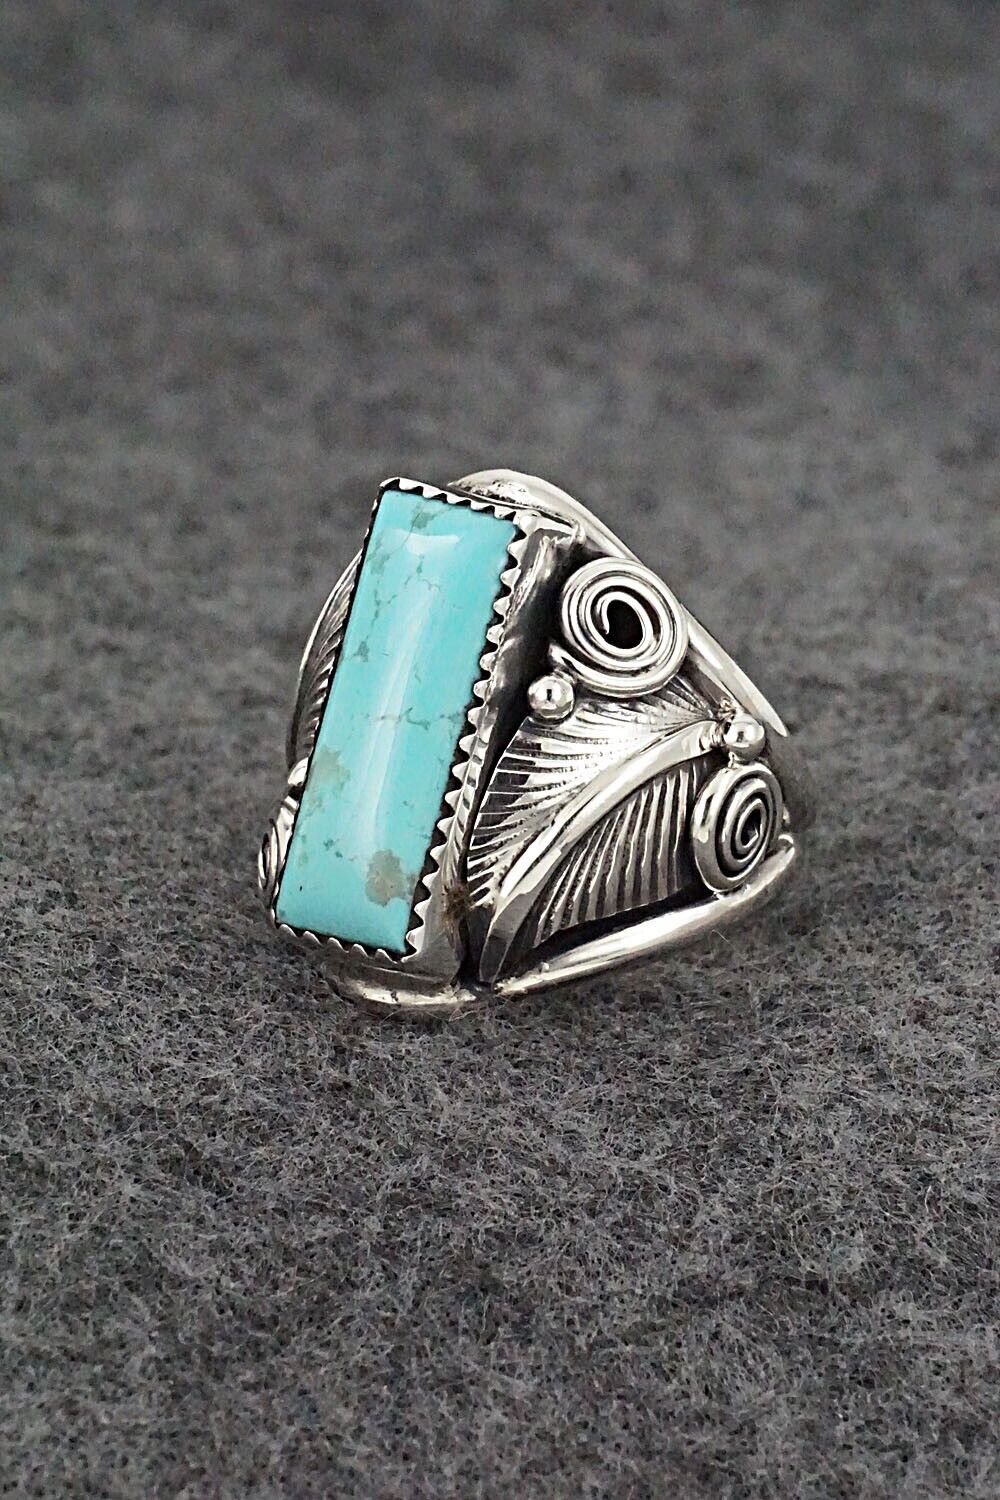 Turquoise & Sterling Silver Ring - Darrell Morgan - Size 9